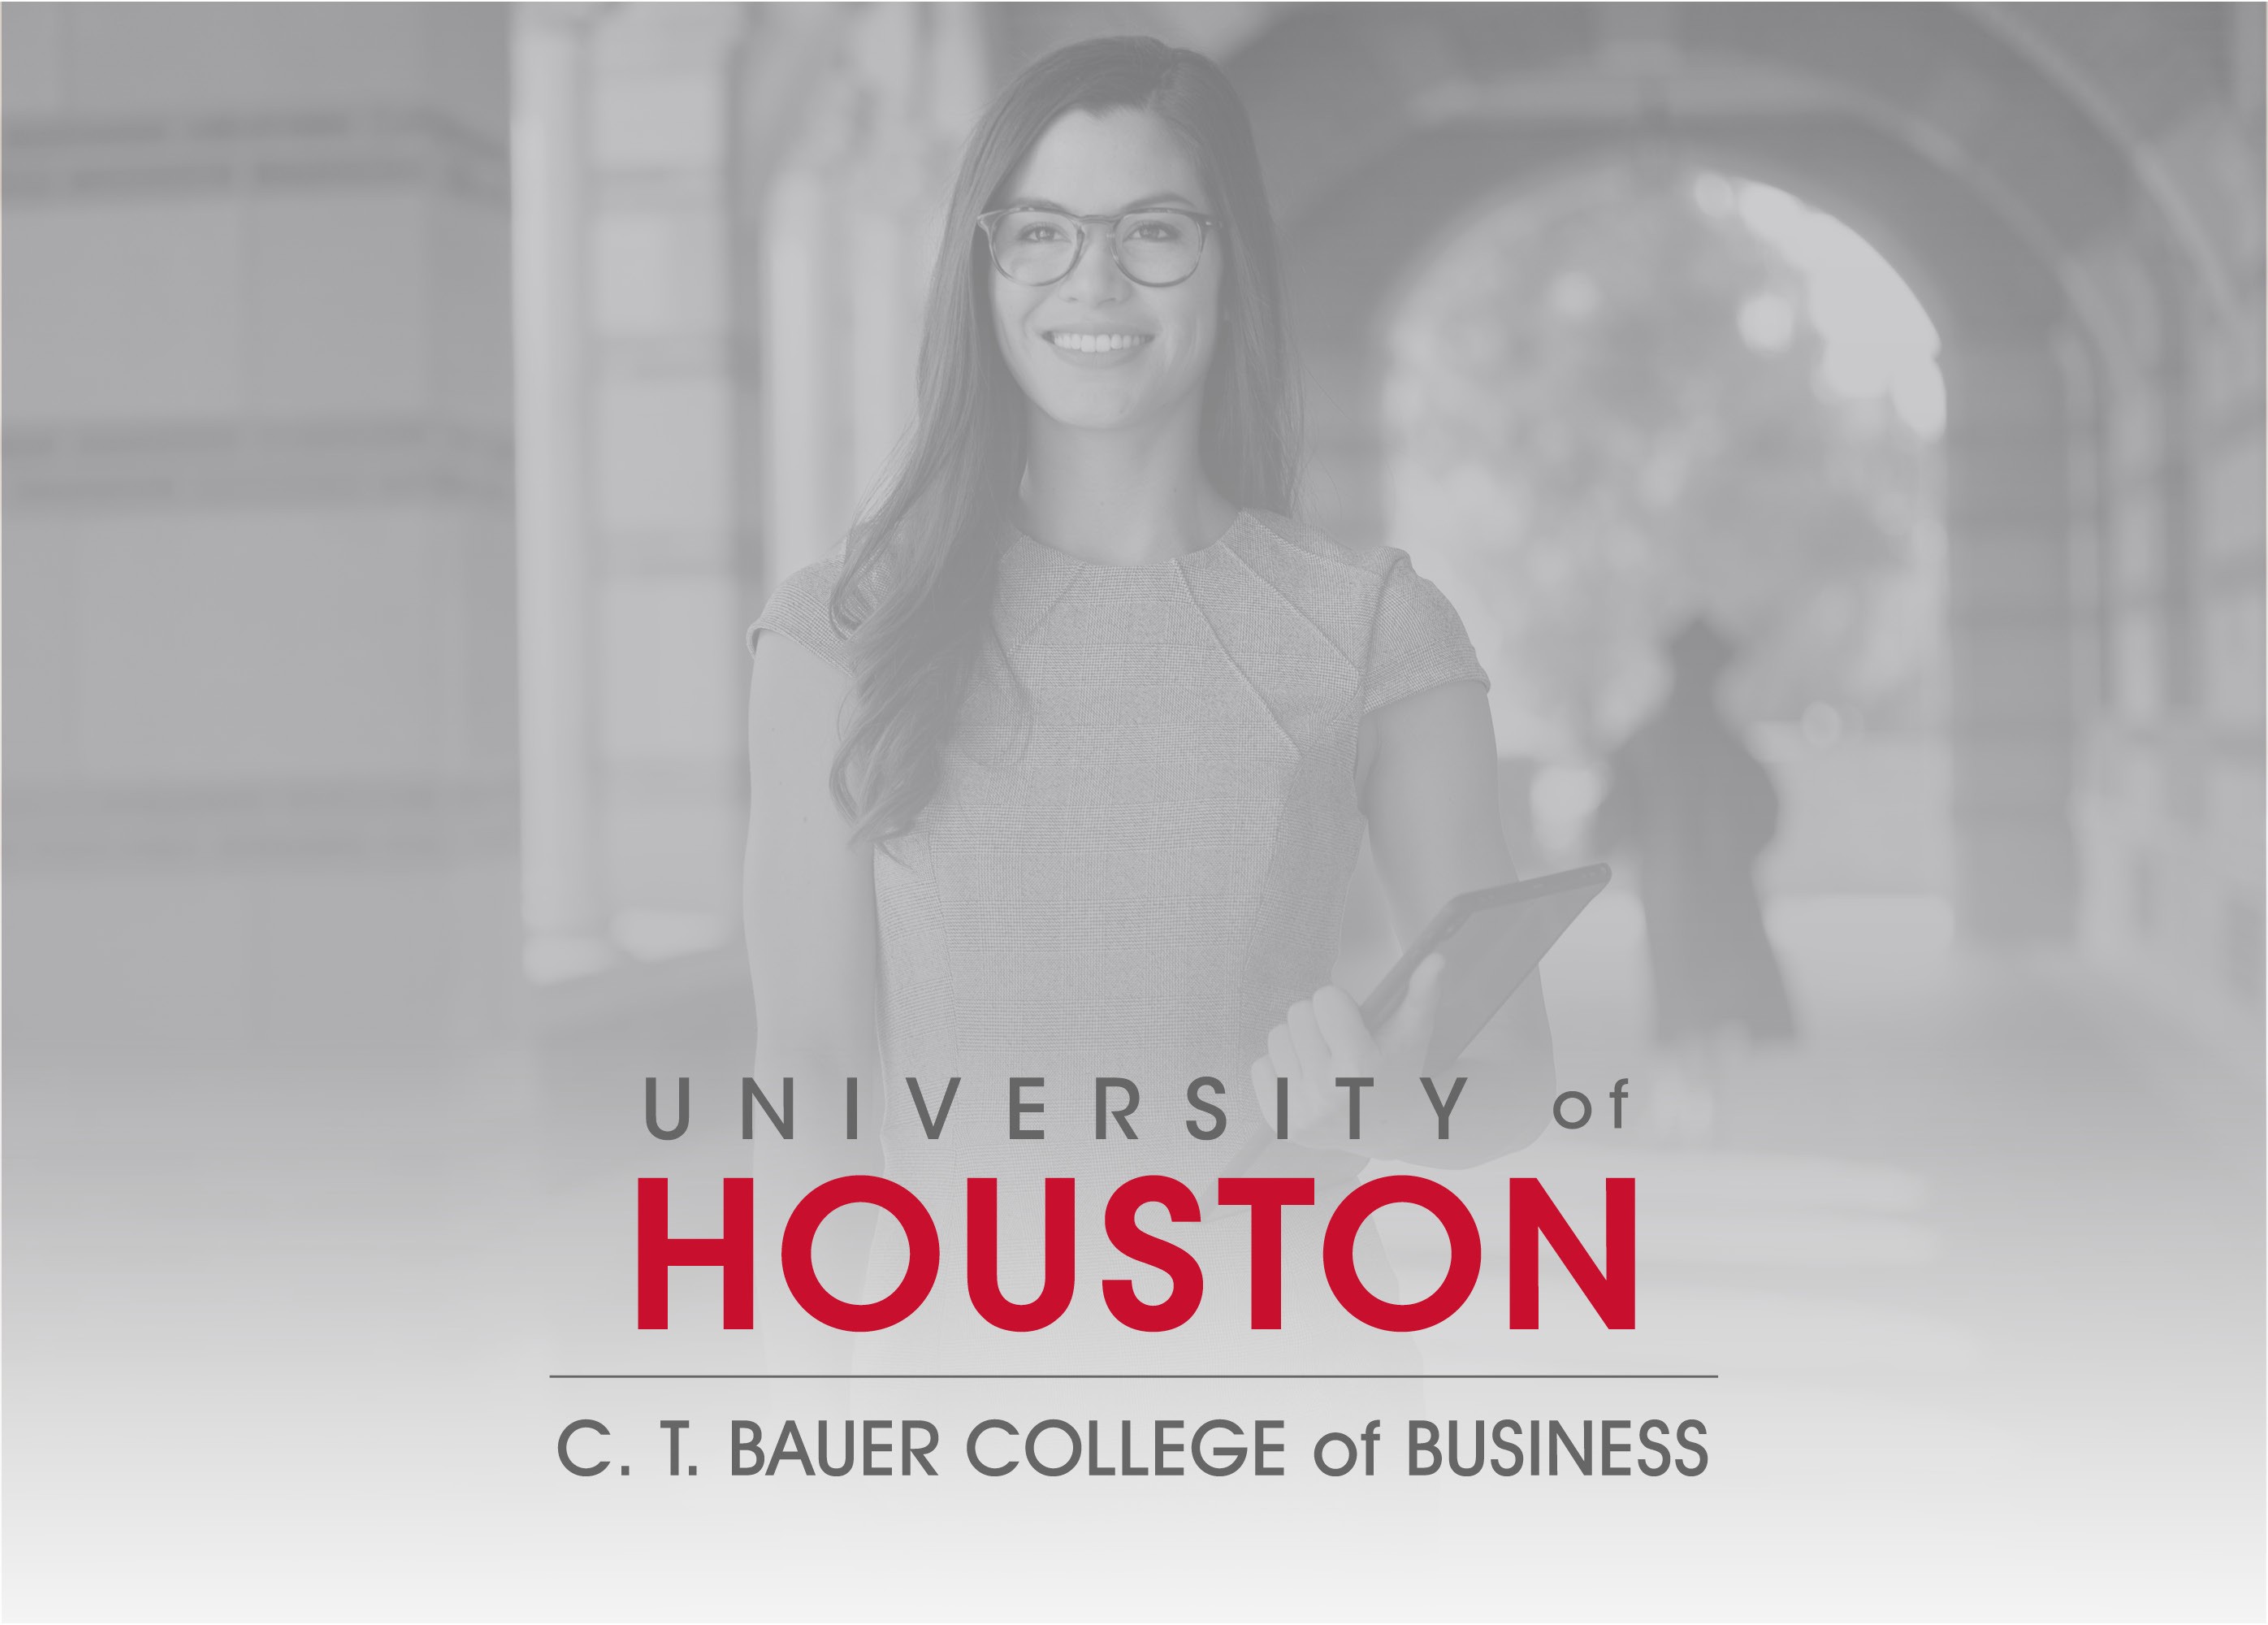 Cover of the C.T. Bauer School of Business case study document.